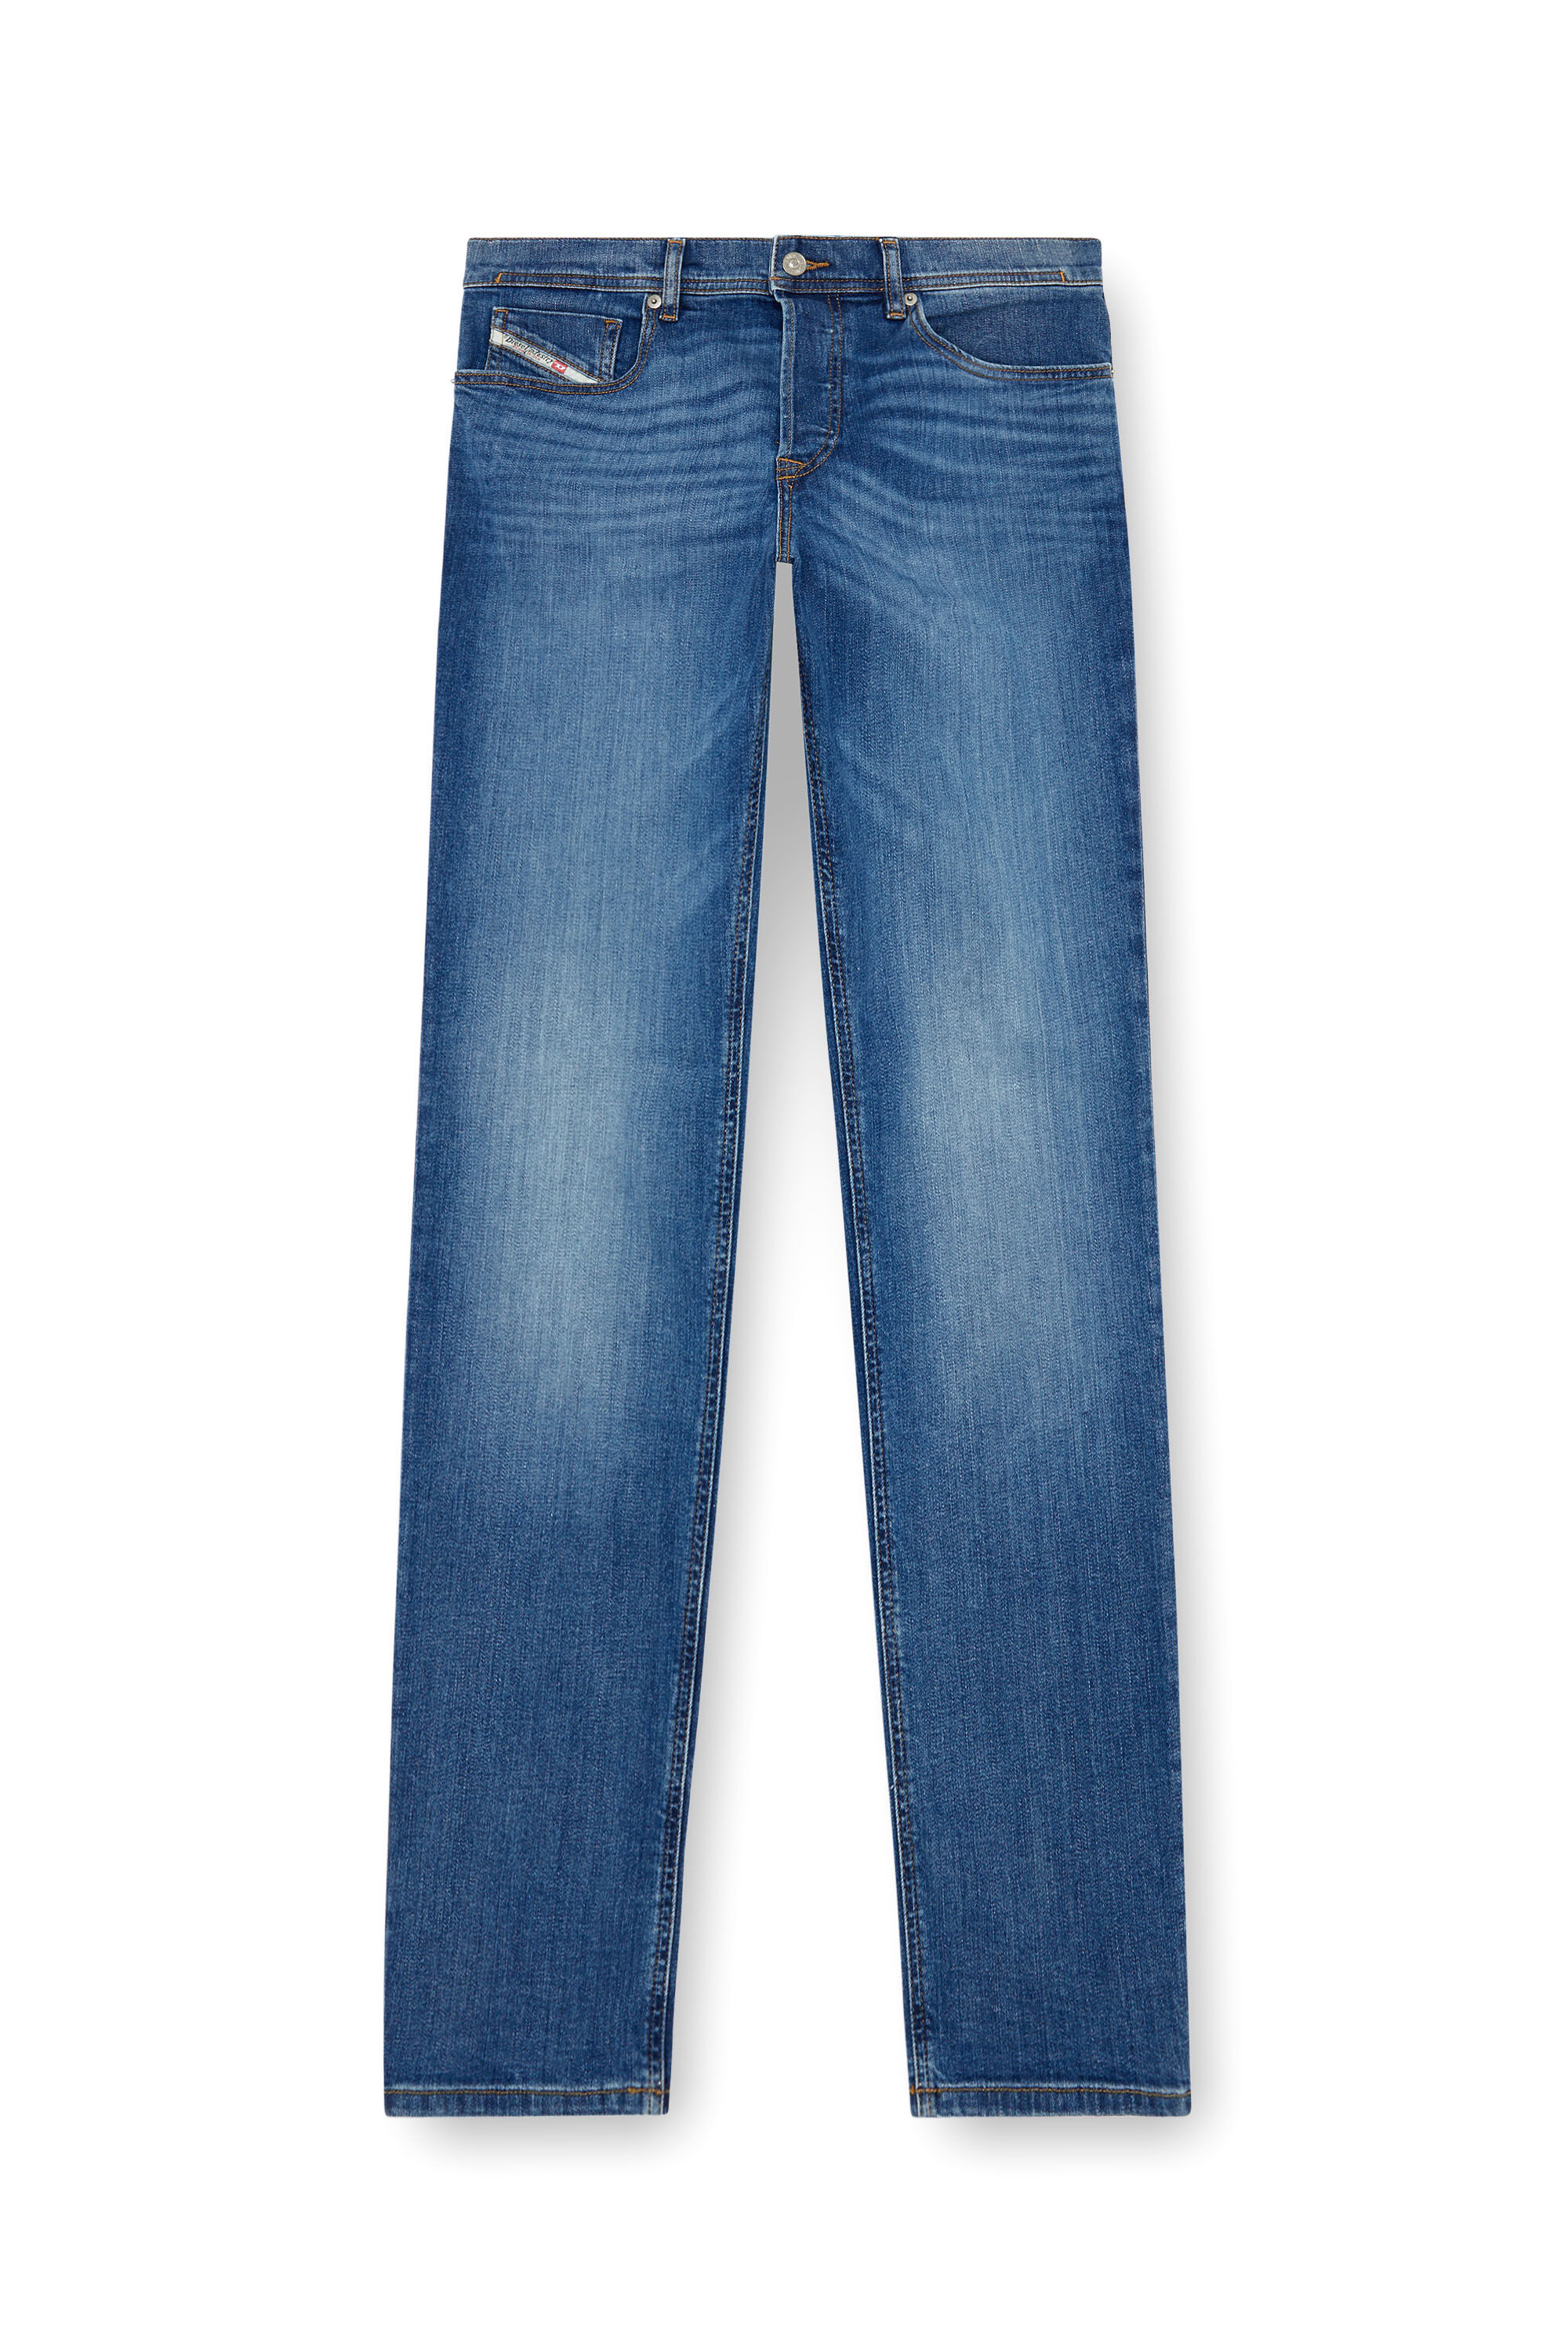 Diesel - Tapered Jeans 2023 D-Finitive 0KIAL, Hombre Tapered Jeans - 2023 D-Finitive in Azul marino - Image 1